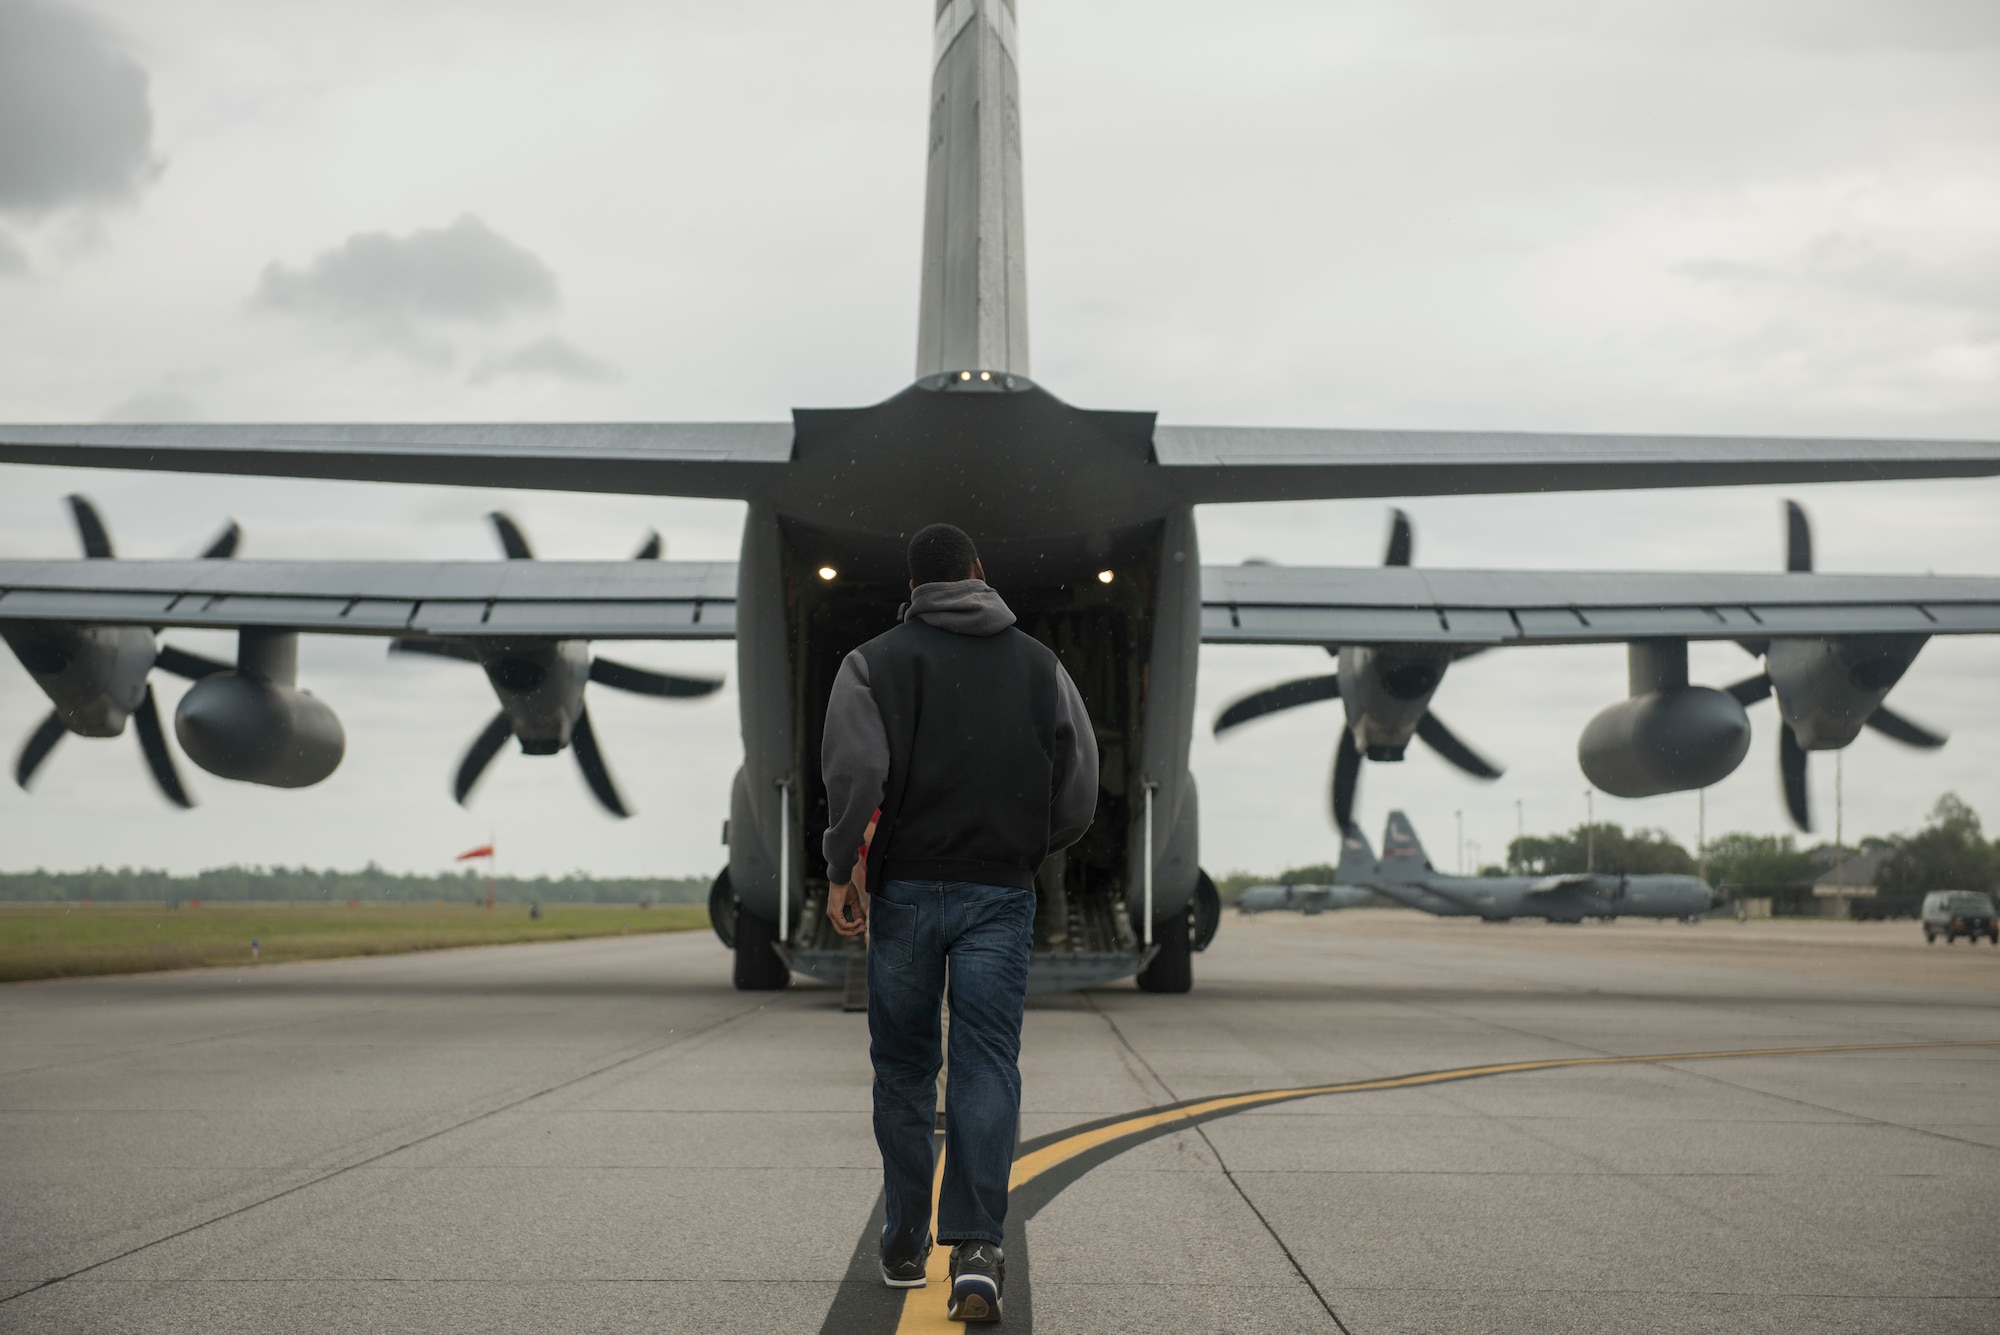 A U.S. Air Force ROTC cadet walks toward the back of a MC-130J Commando II for an incentive flight during Pathways to Blue April 6, 2018, on Keesler Air Force Base, Mississippi. Pathways to Blue is a diversity outreach event, hosted by 2nd Air Force with the support of the 81st Training Wing and the 403rd Wing. The event provided more than 280 cadets from 15 different colleges and universities a chance to receive hands-on demonstrations of various career fields. (U.S. Air Force photo by Senior Airman Travis Beihl)